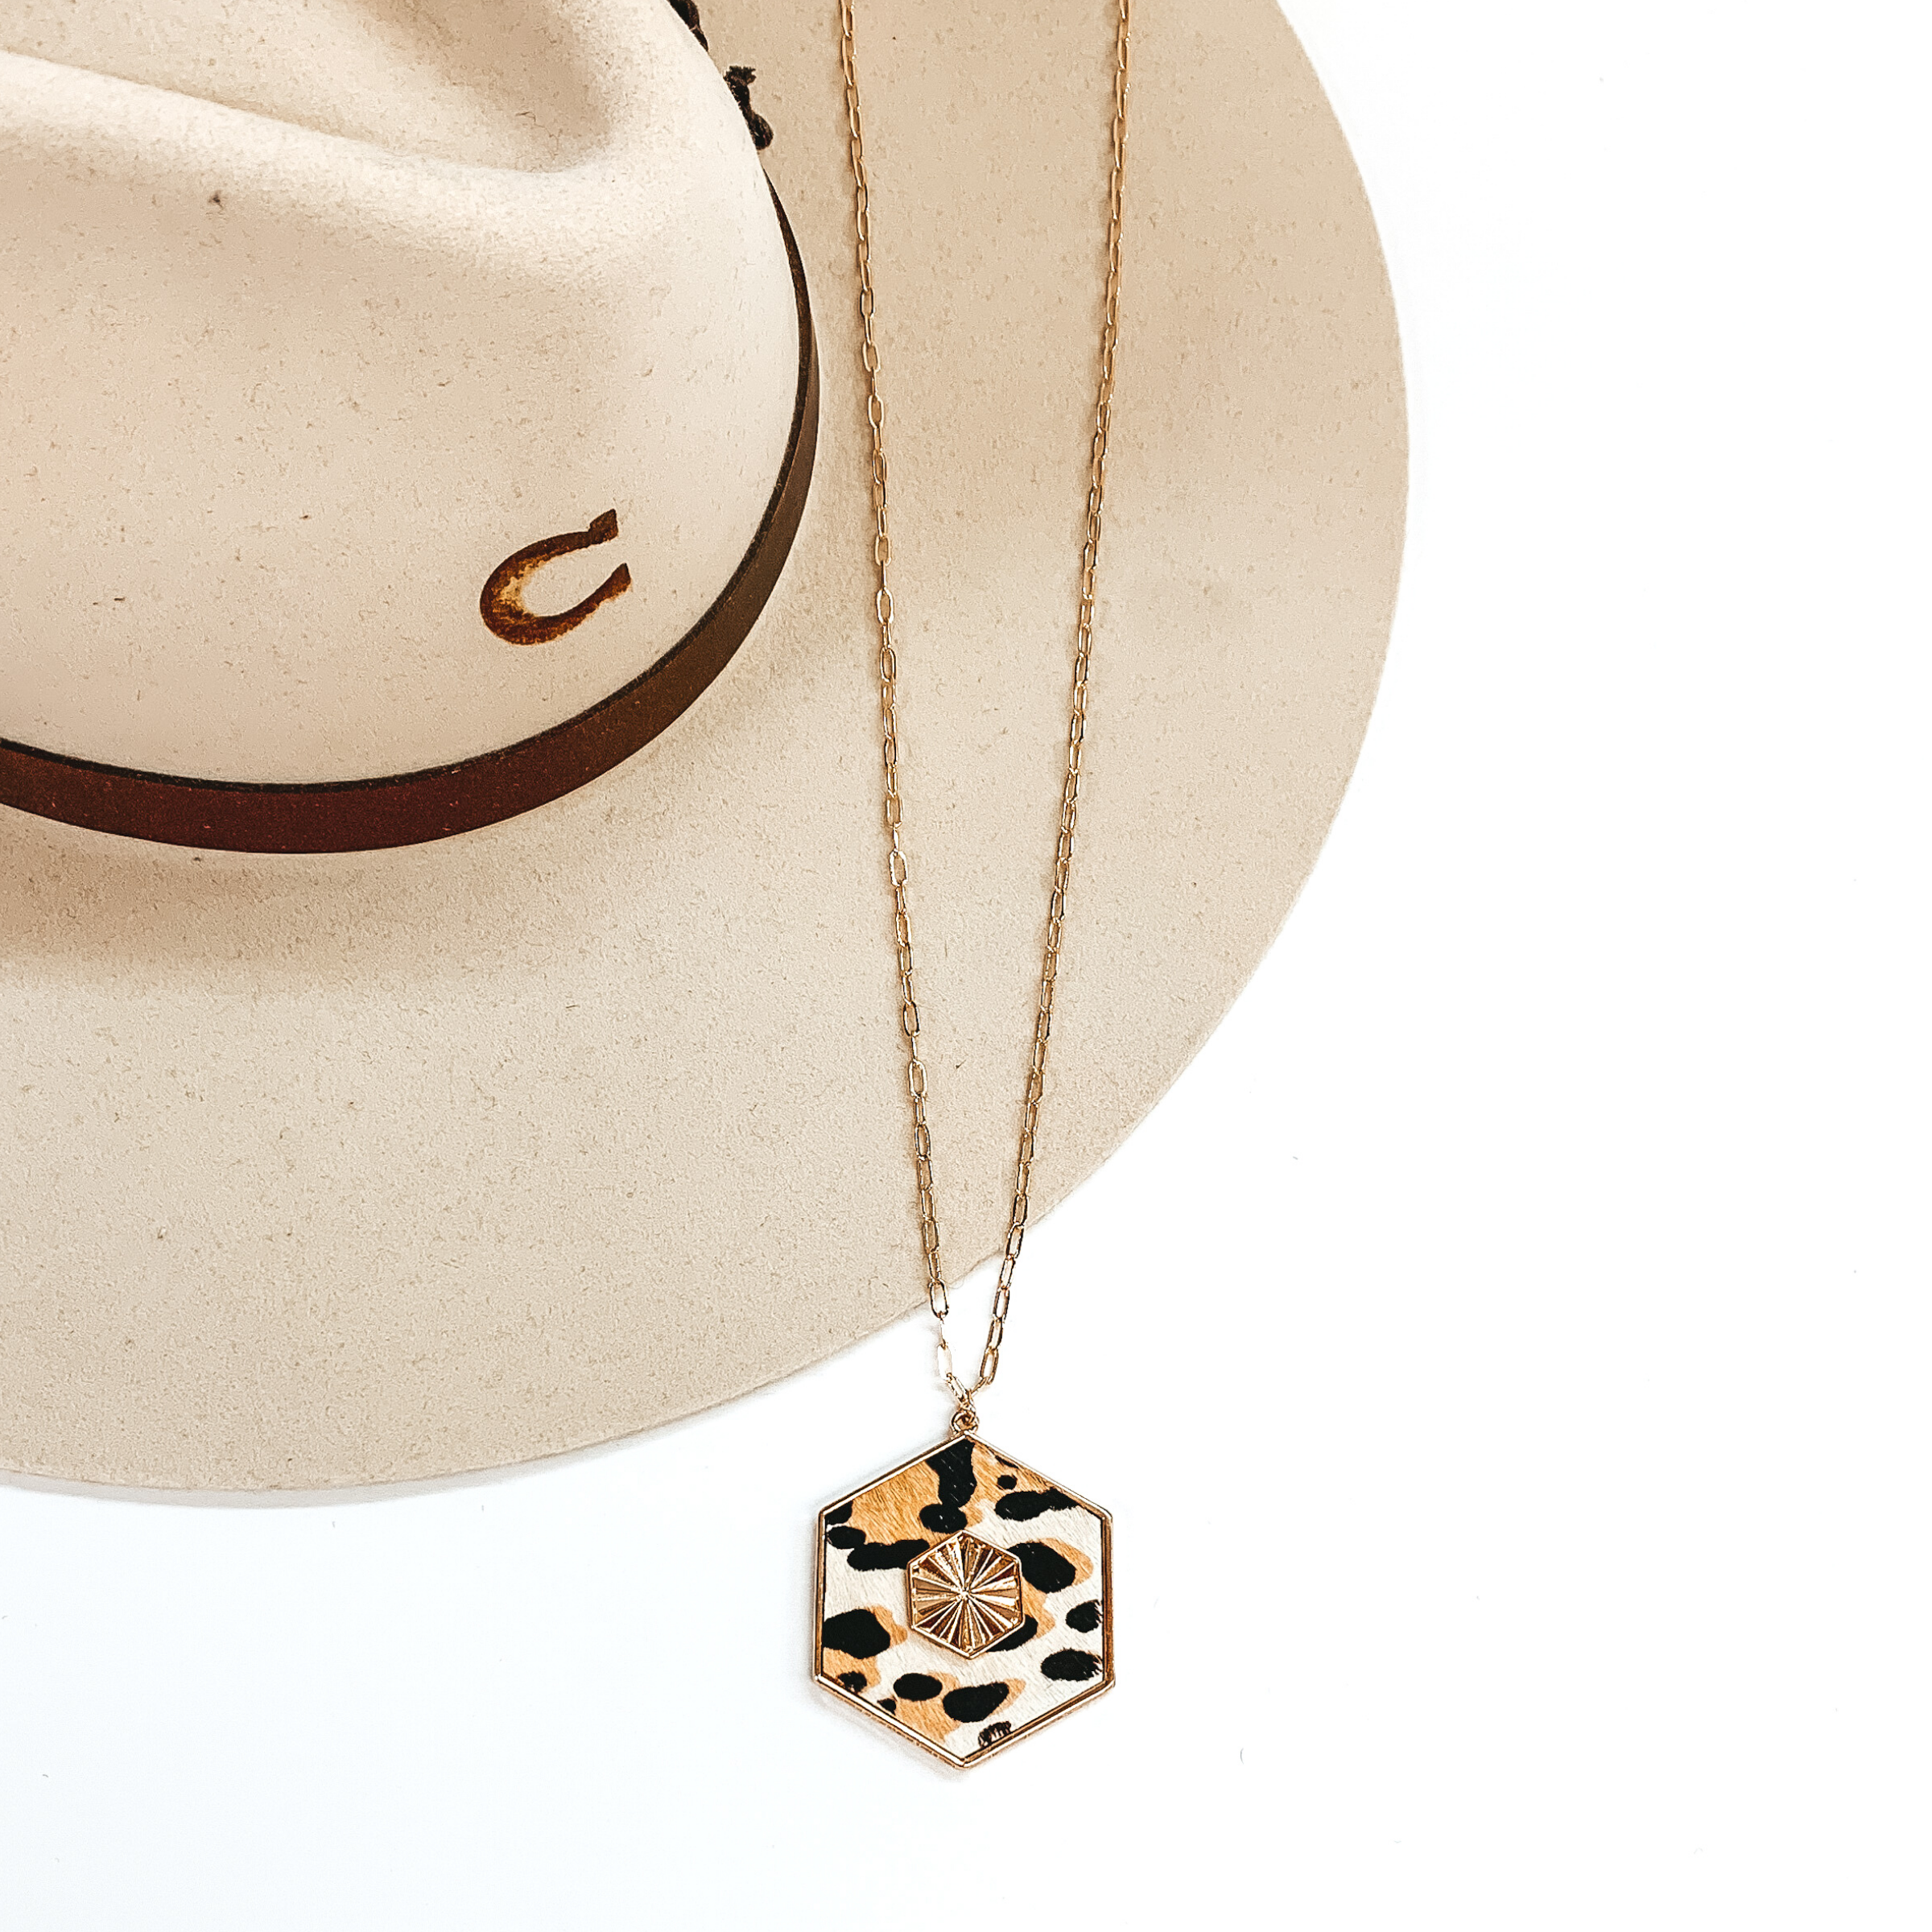 Long Gold Chain Necklace with a Hexagon Pendant in Ivory Leopard Print - Giddy Up Glamour Boutique